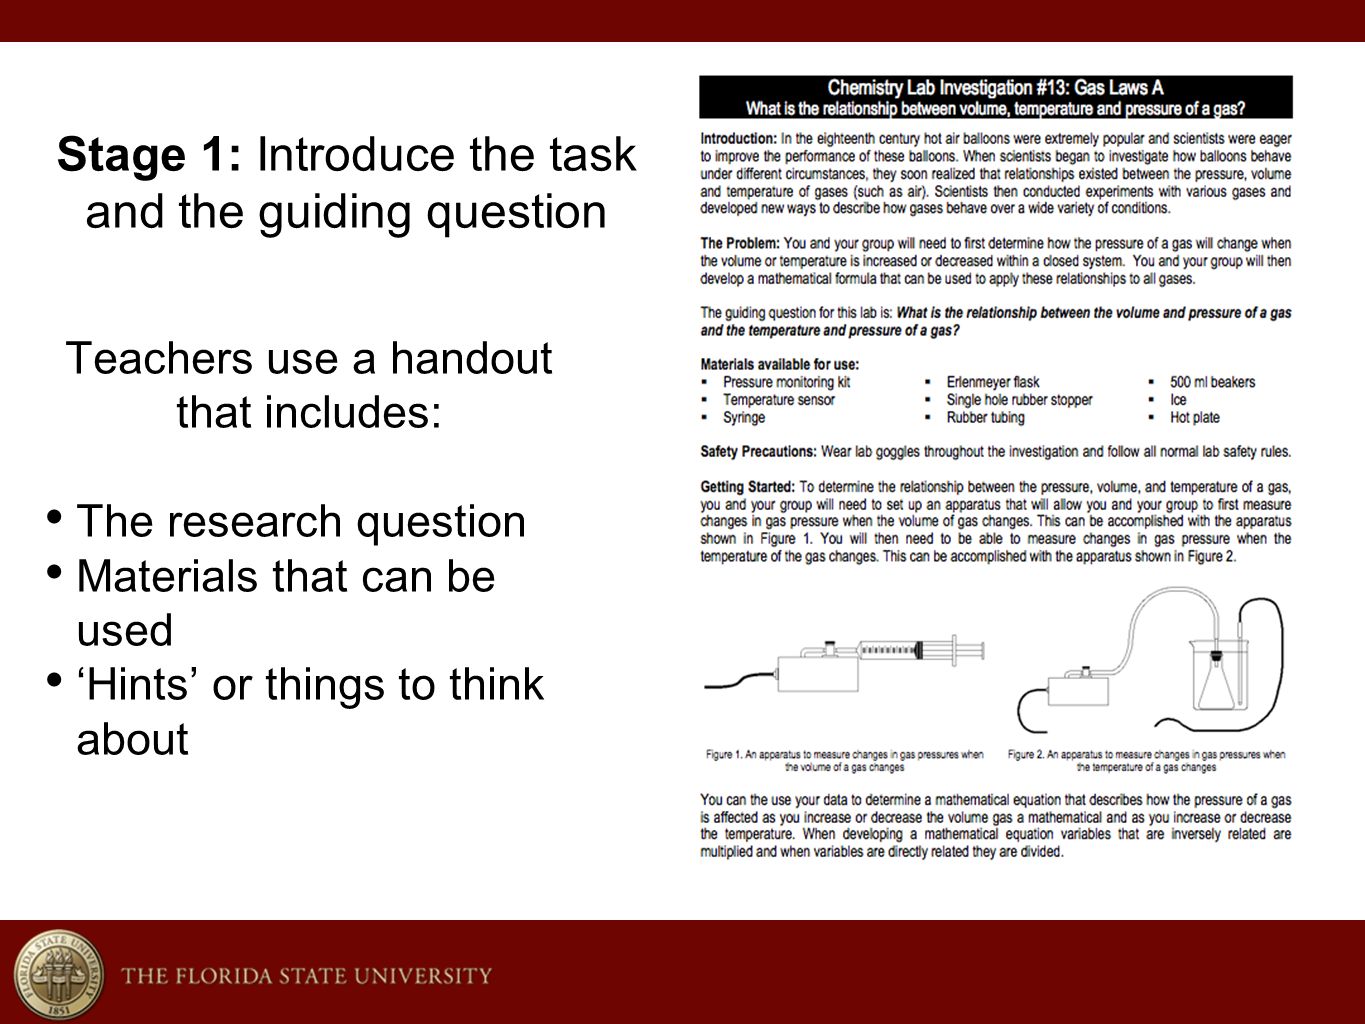 Stage 1: Introduce the task and the guiding question Teachers use a handout that includes: The research question Materials that can be used ‘Hints’ or things to think about